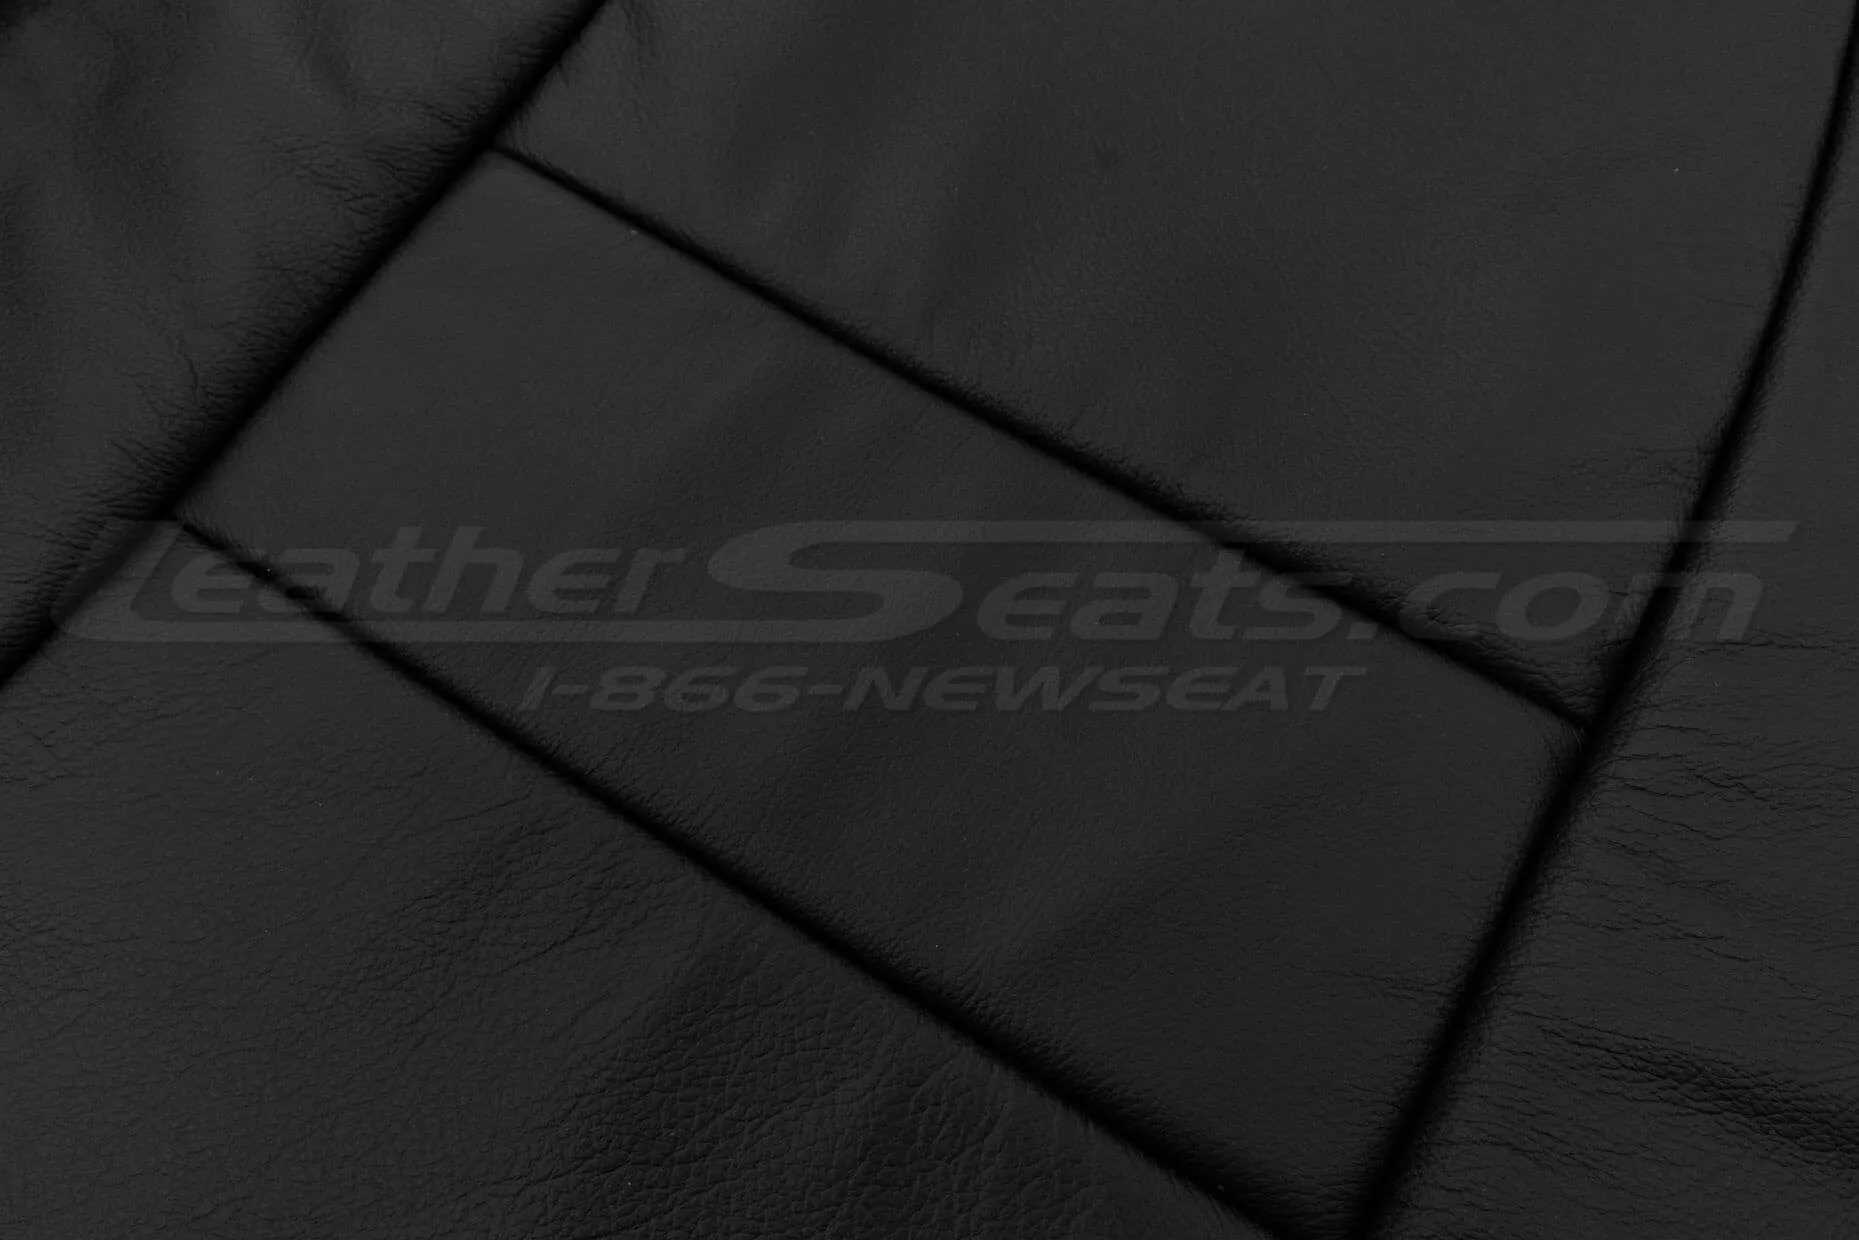 Insert section leather texture